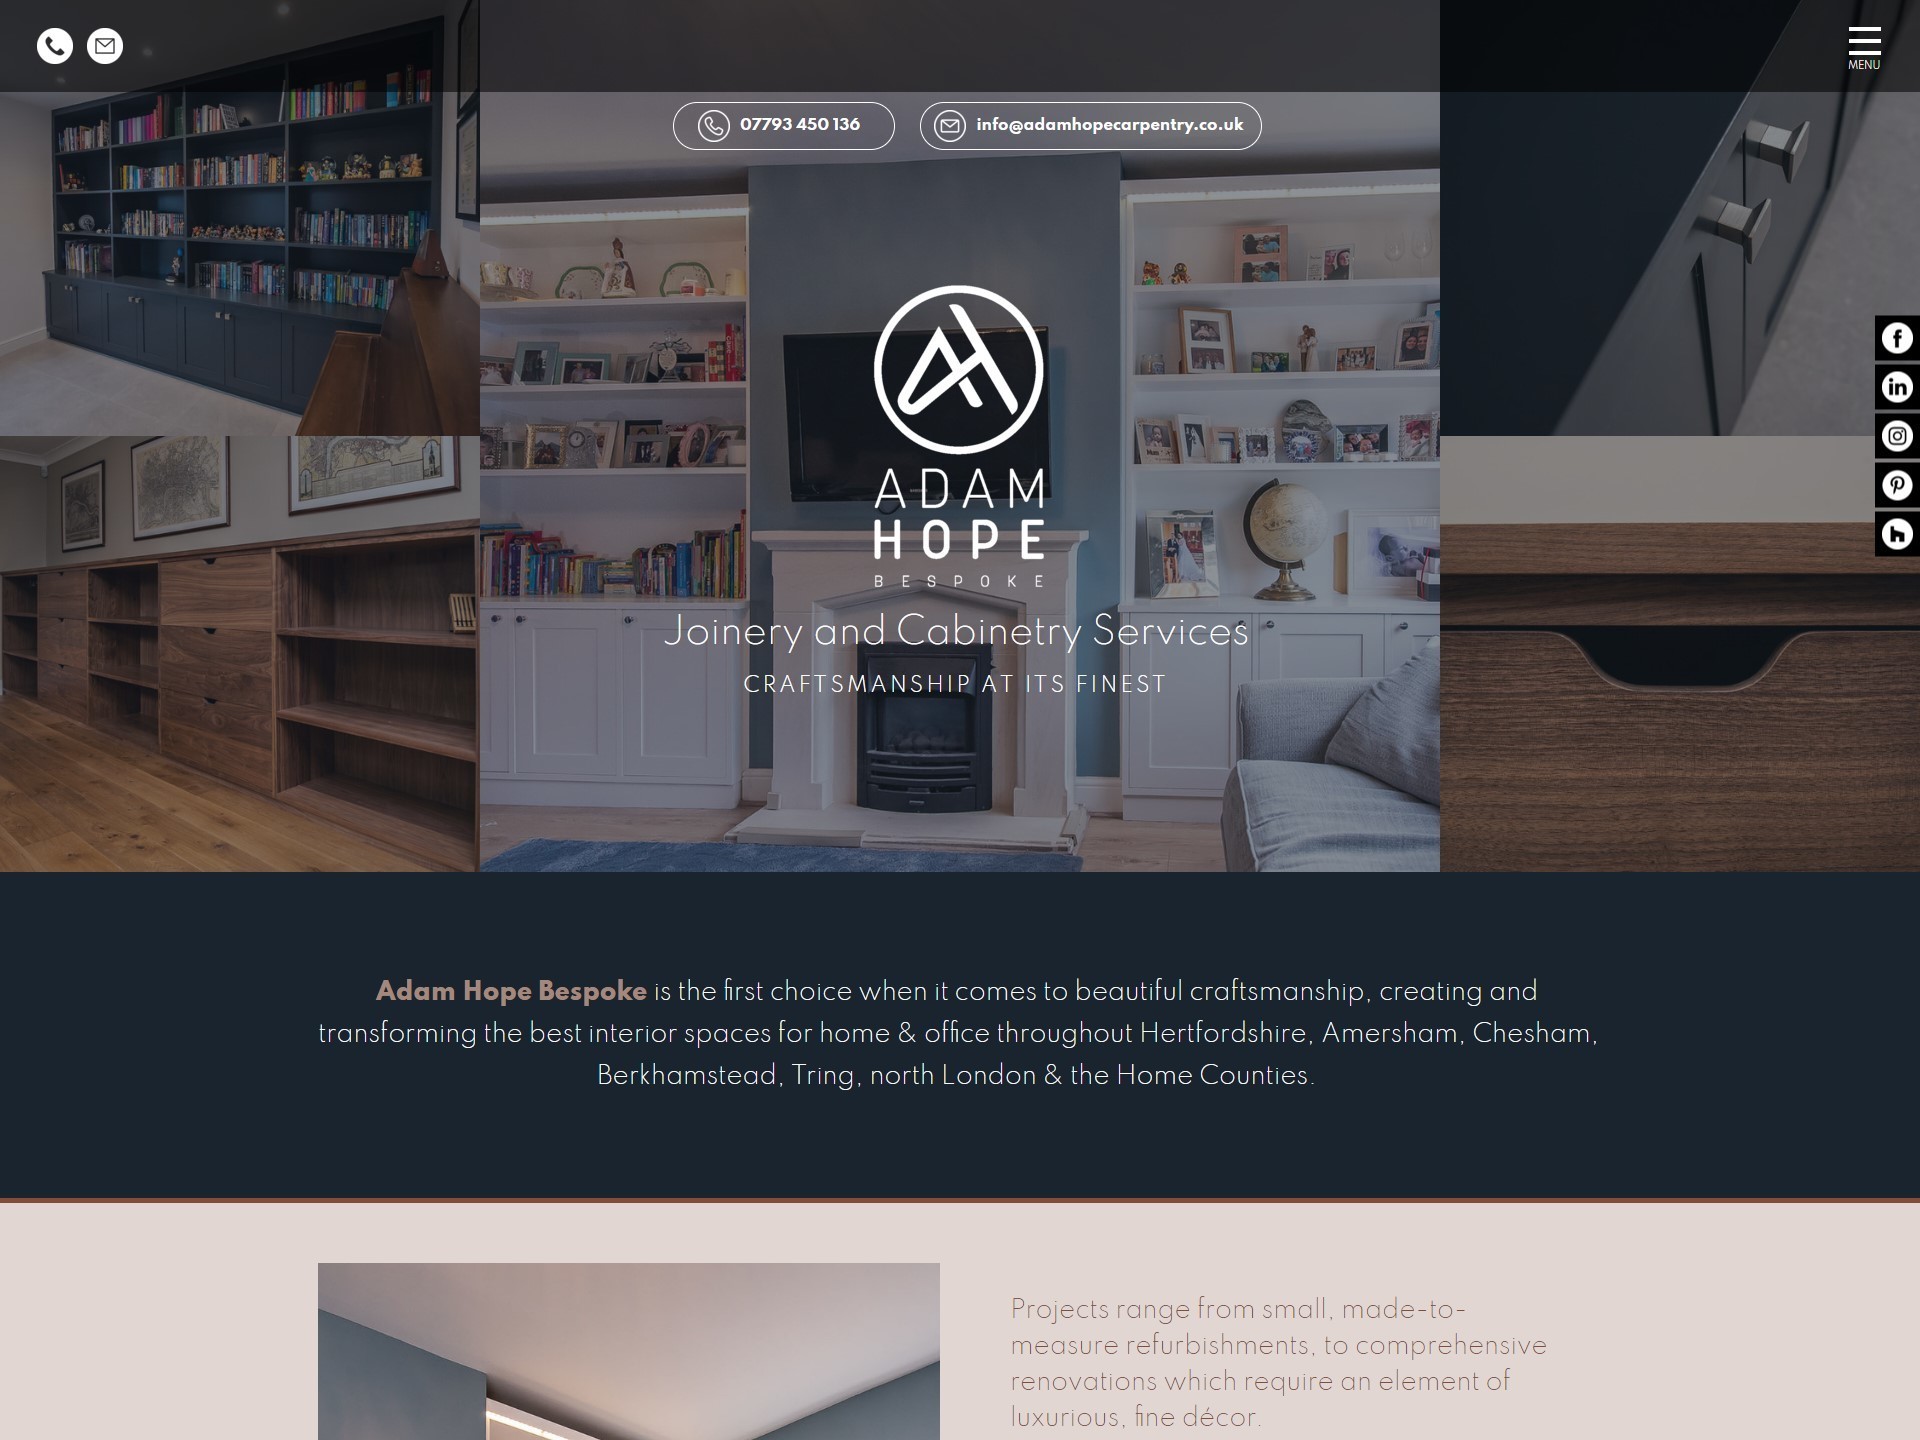 A bespoke joinery and cabinetry services website design